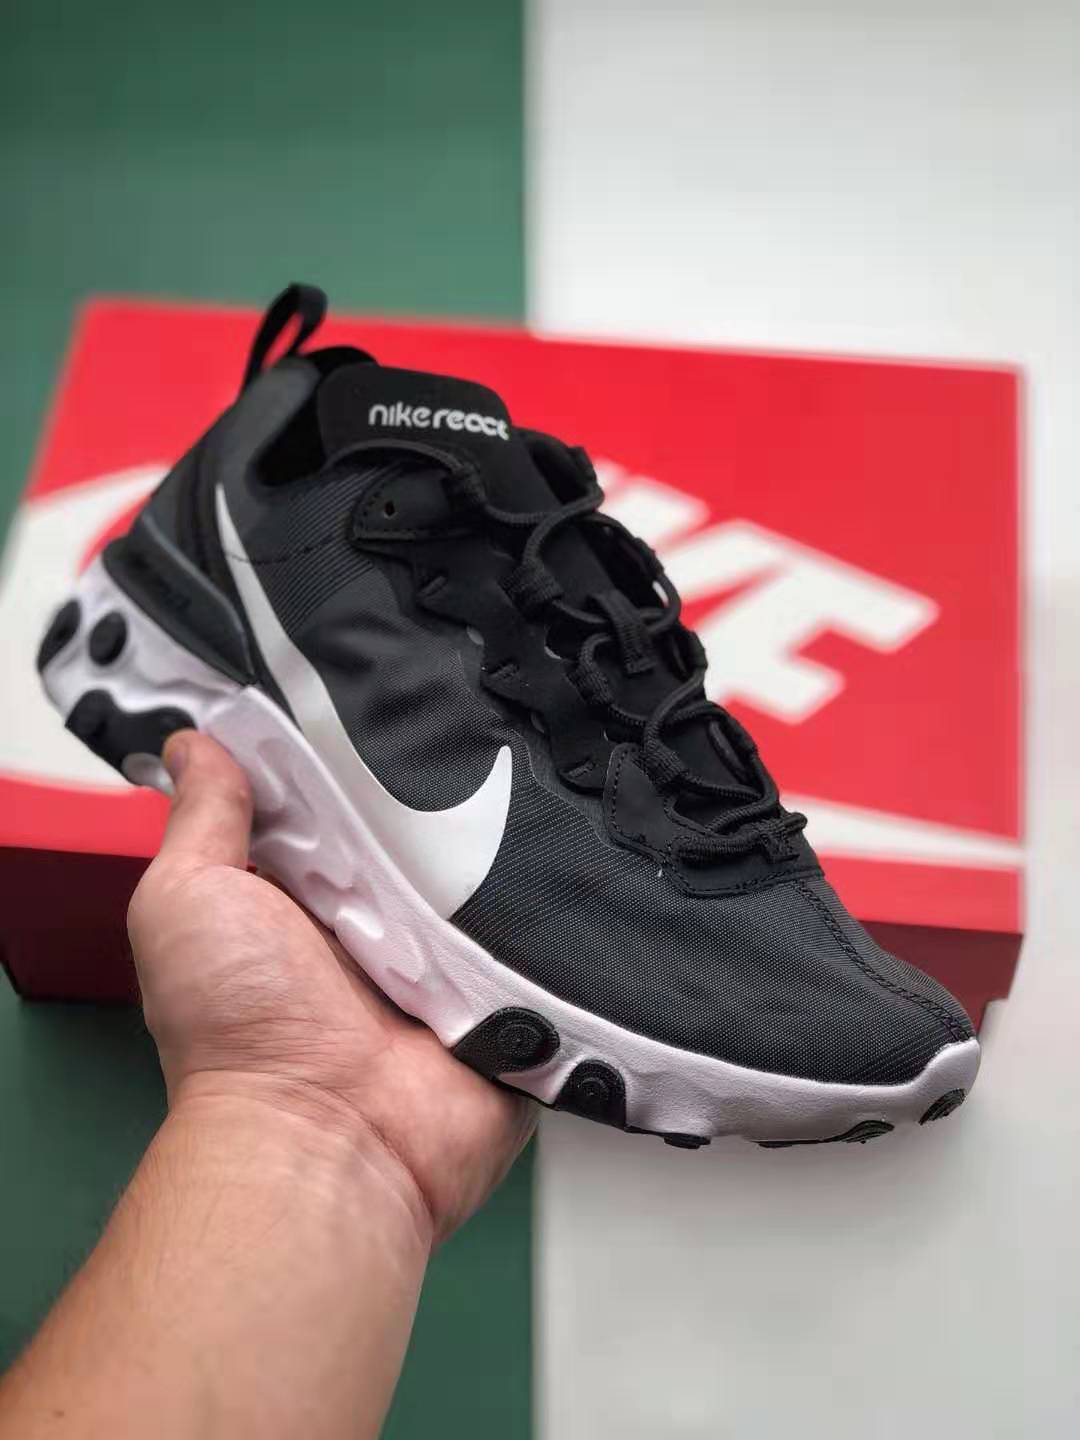 Nike Air VaporMax Plus Black/Pink-Green DM8121-001 - Stylish and Trendy Sneakers for Unbeatable Comfort